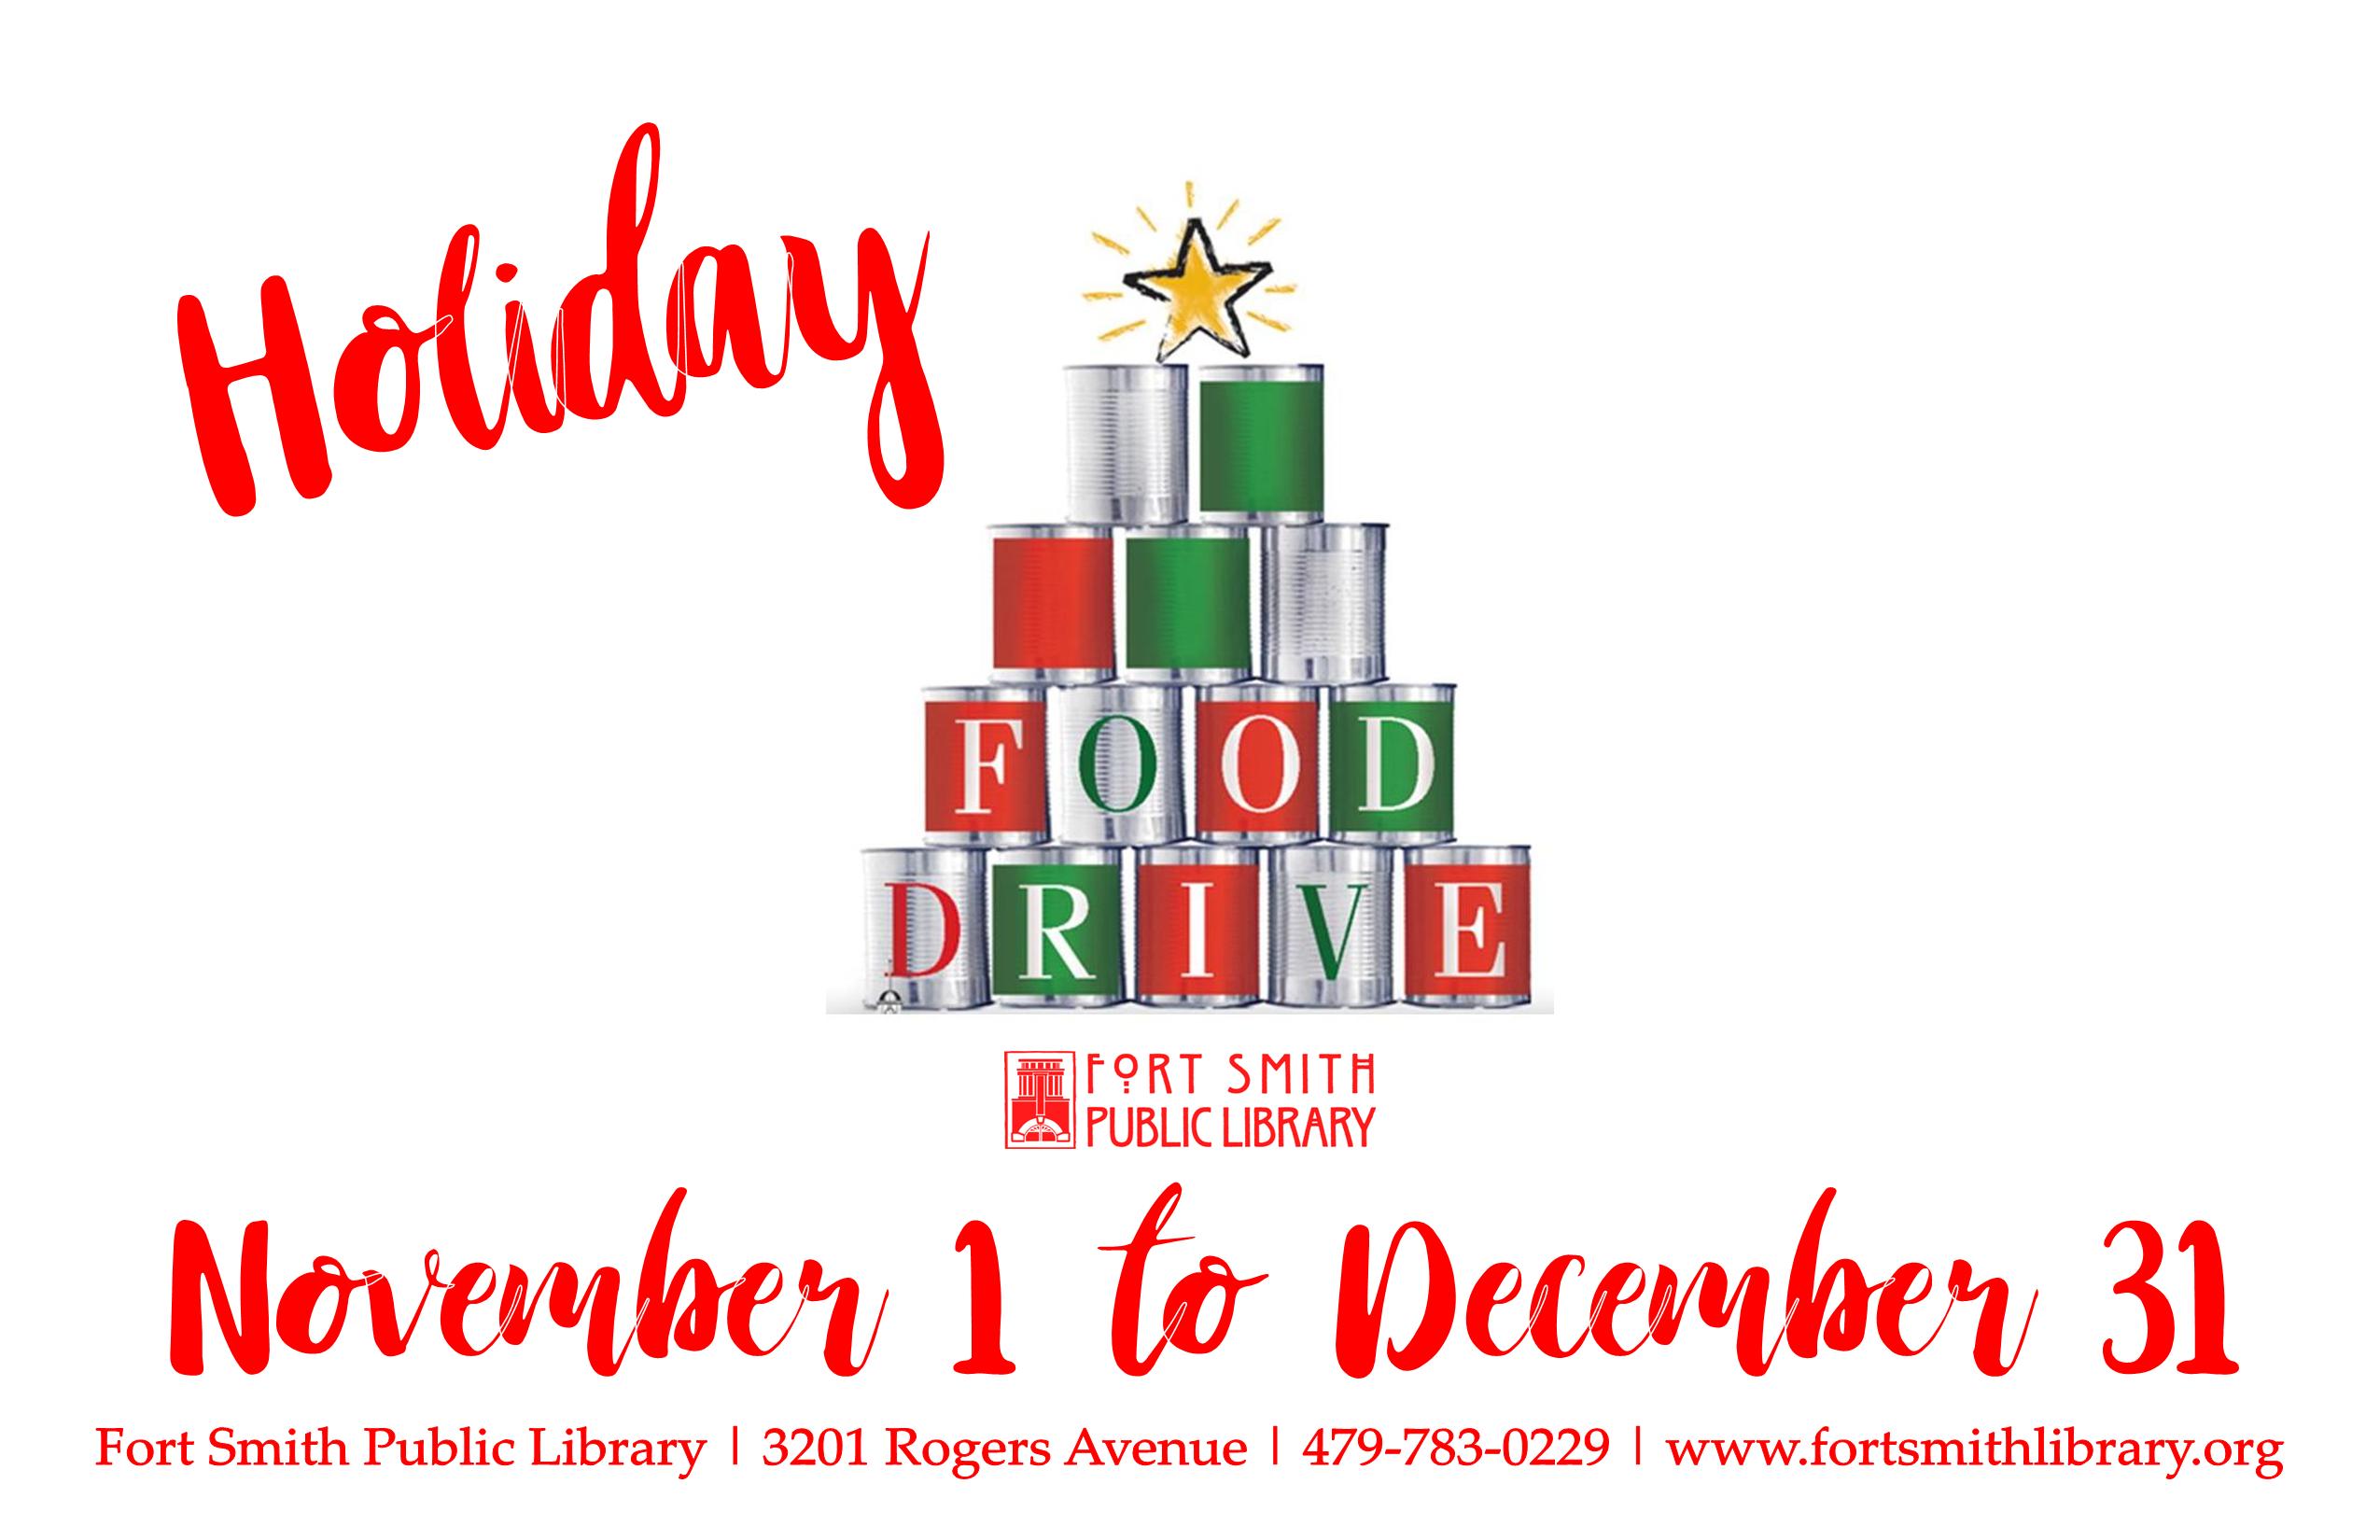 Holiday food drive poster